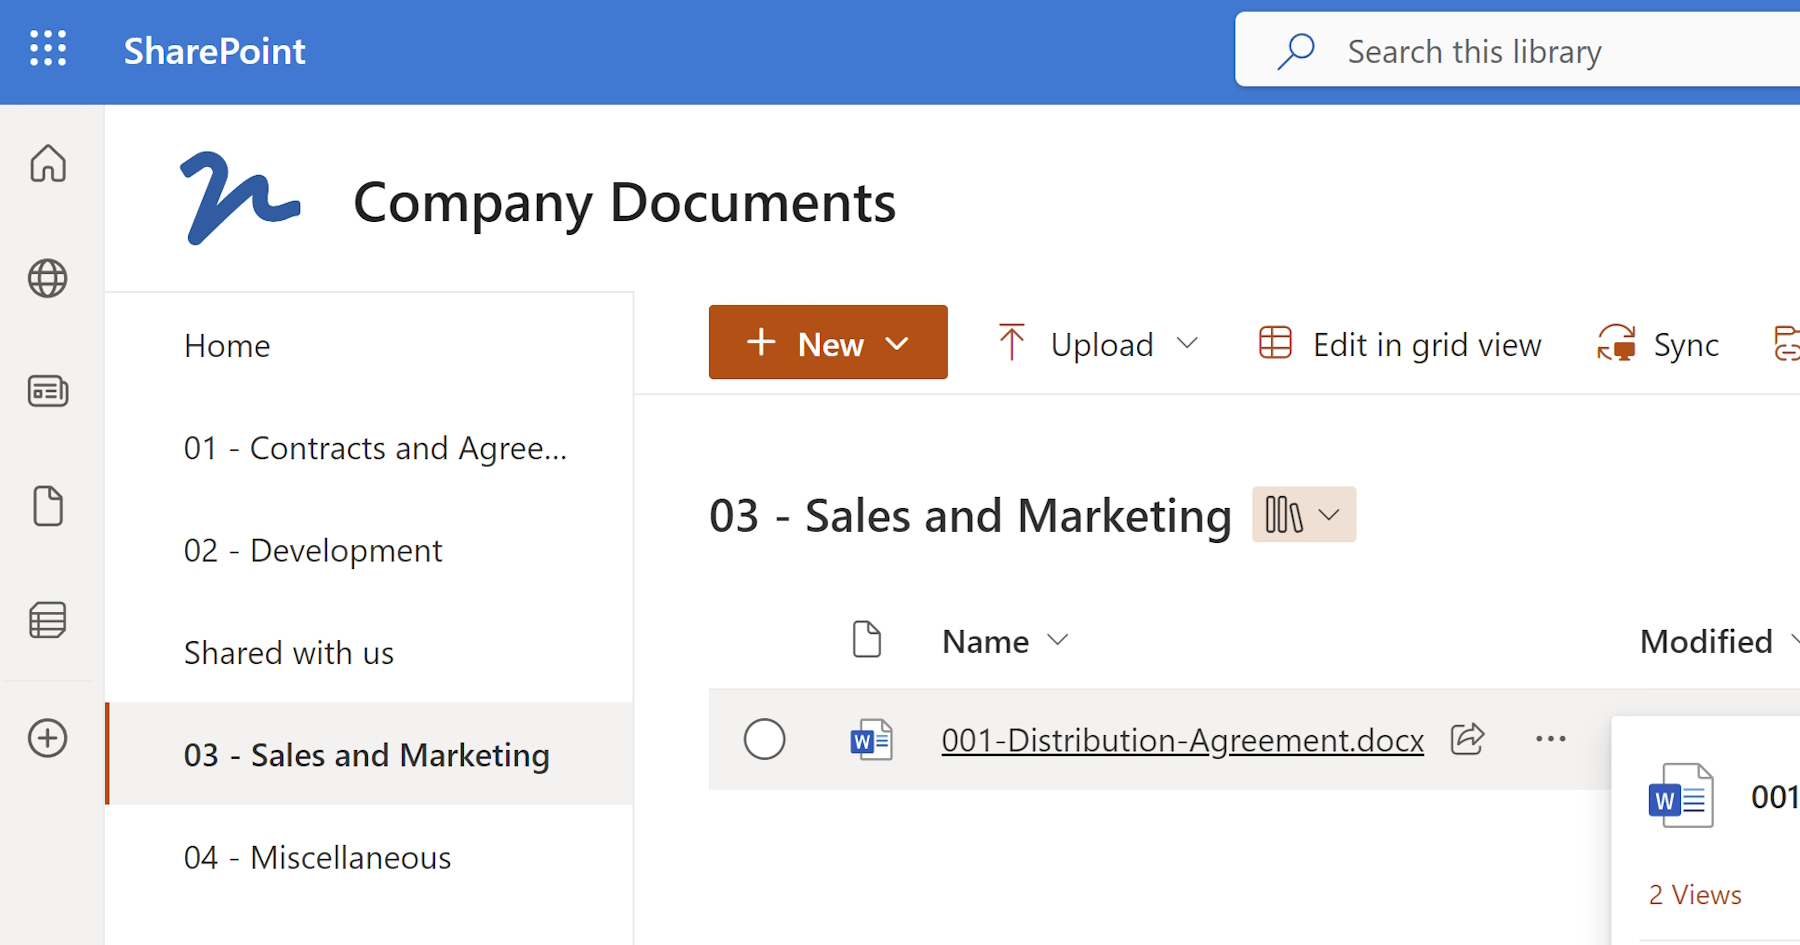 Learn how to create a document management system using SharePoint sites. Follow step-by-step instructions to configure document libraries, define content types, set up workflows, and implement security and permissions.